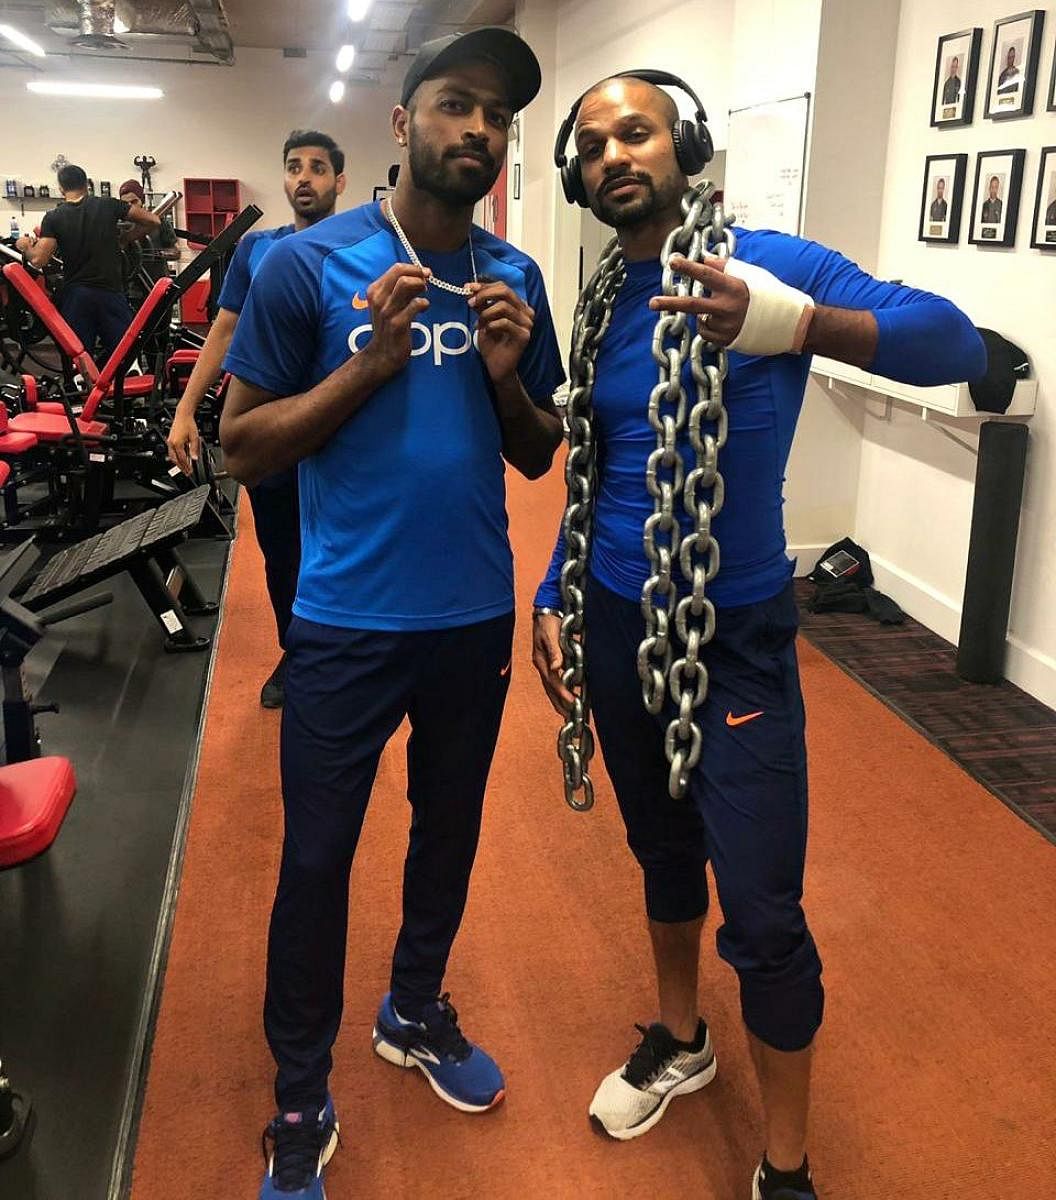 MAKING WORKOUTS FUN India’s injured opener Shikhar Dhawan (right) shares a light moment with Hardik Pandya at the gym on Friday. REUTERS